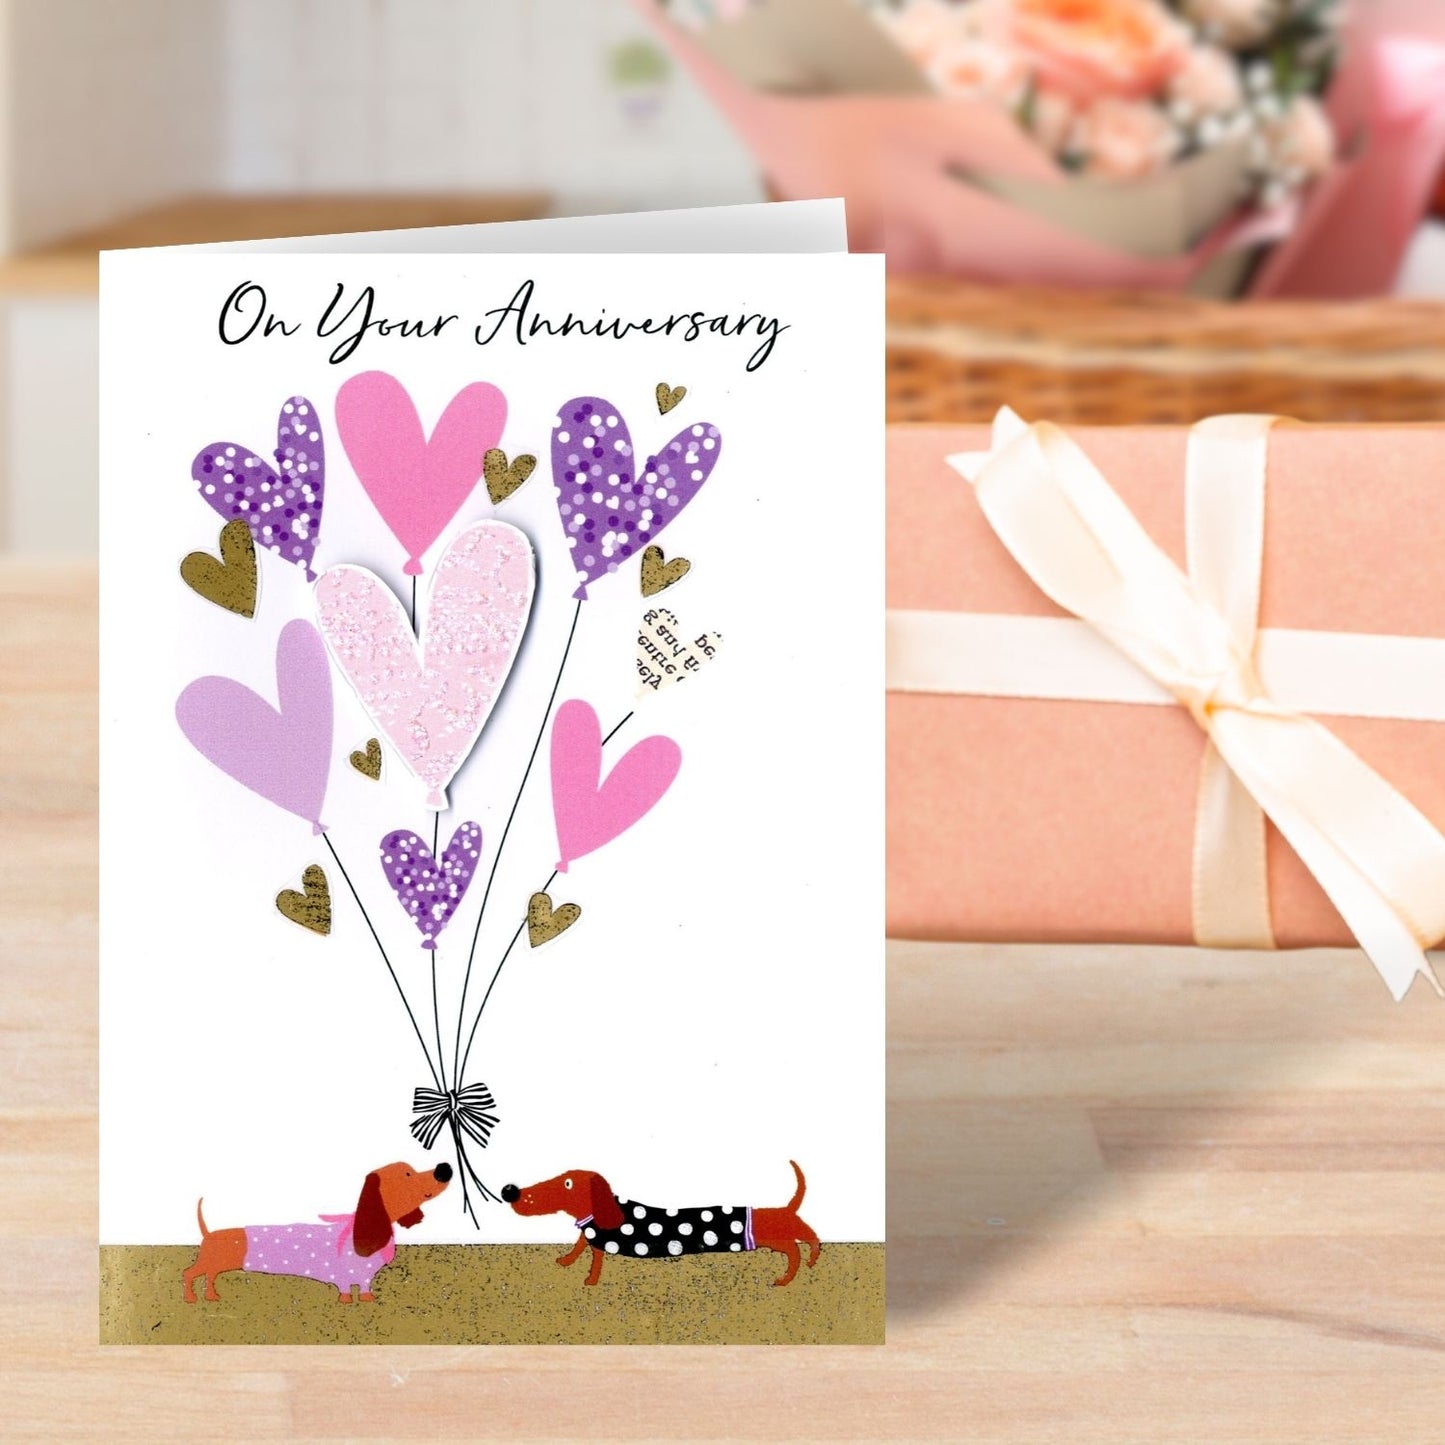 On Your Anniversary Heart Balloons Greeting Card